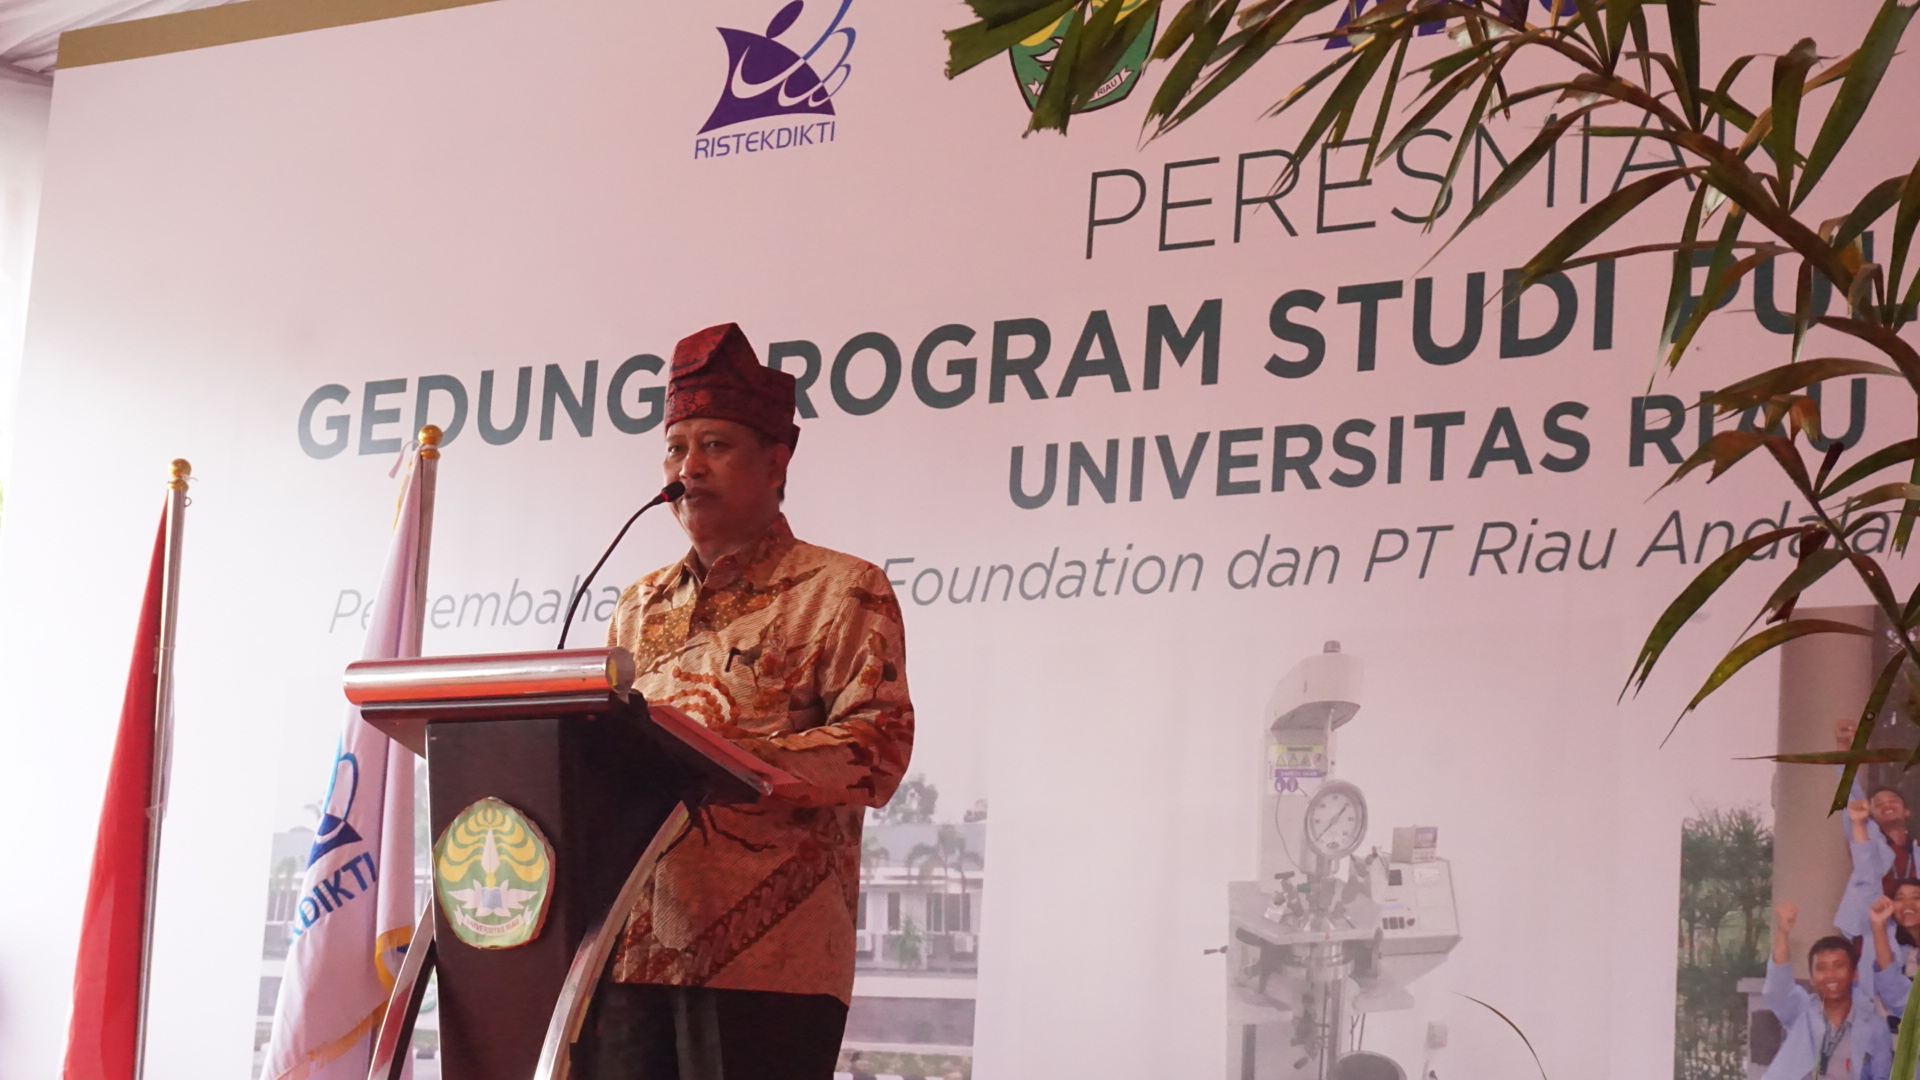 Welcome speech of Minister of Research, Technology and Higher Education (Menristekdikti) of Indonesia, Mohamad Nasir